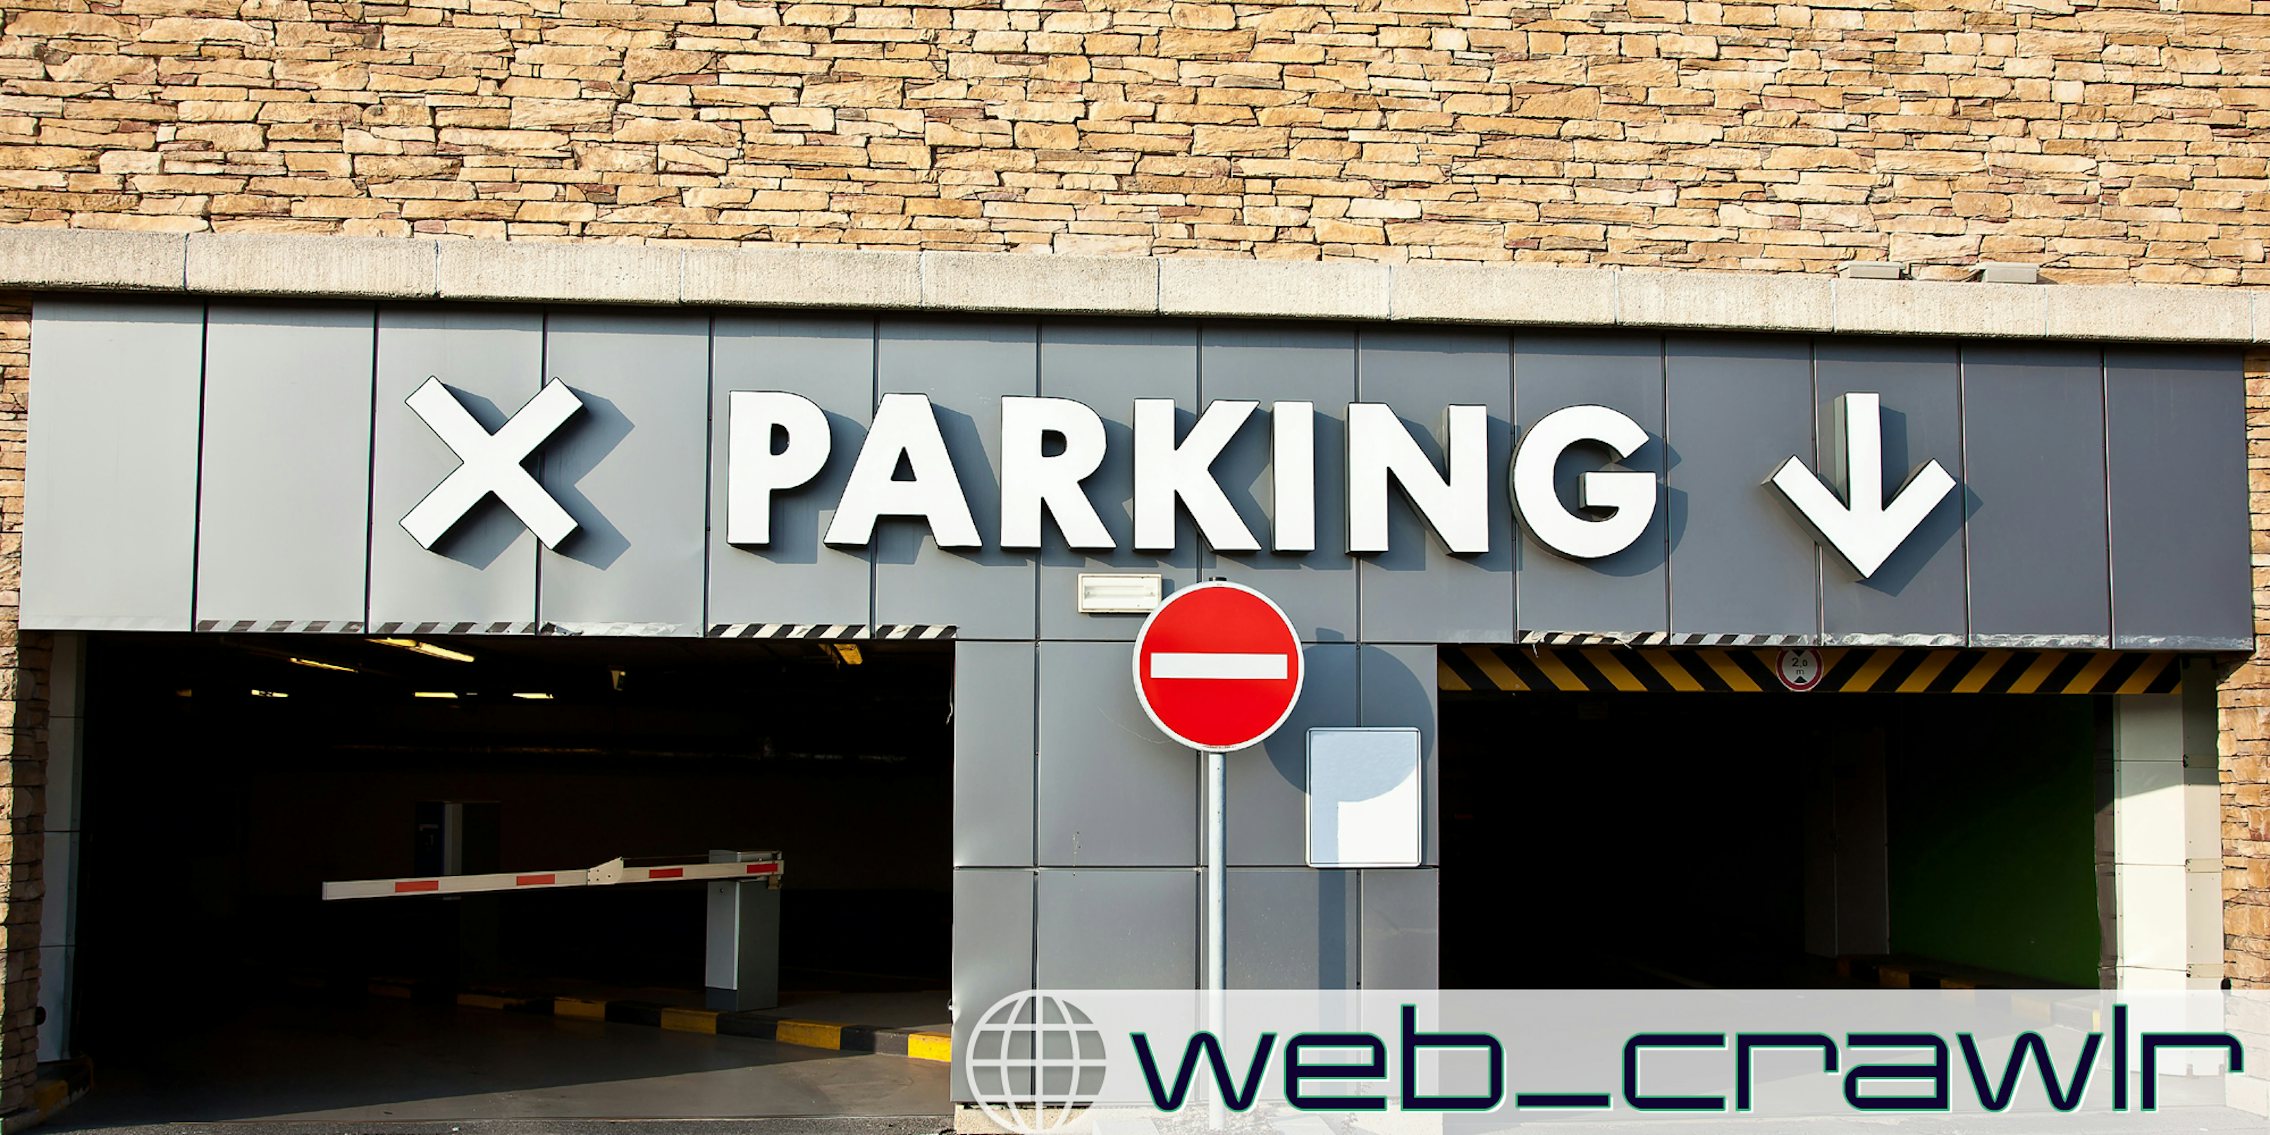 A parking garage. The Daily Dot newsletter web_crawlr logo is in the top right corner.